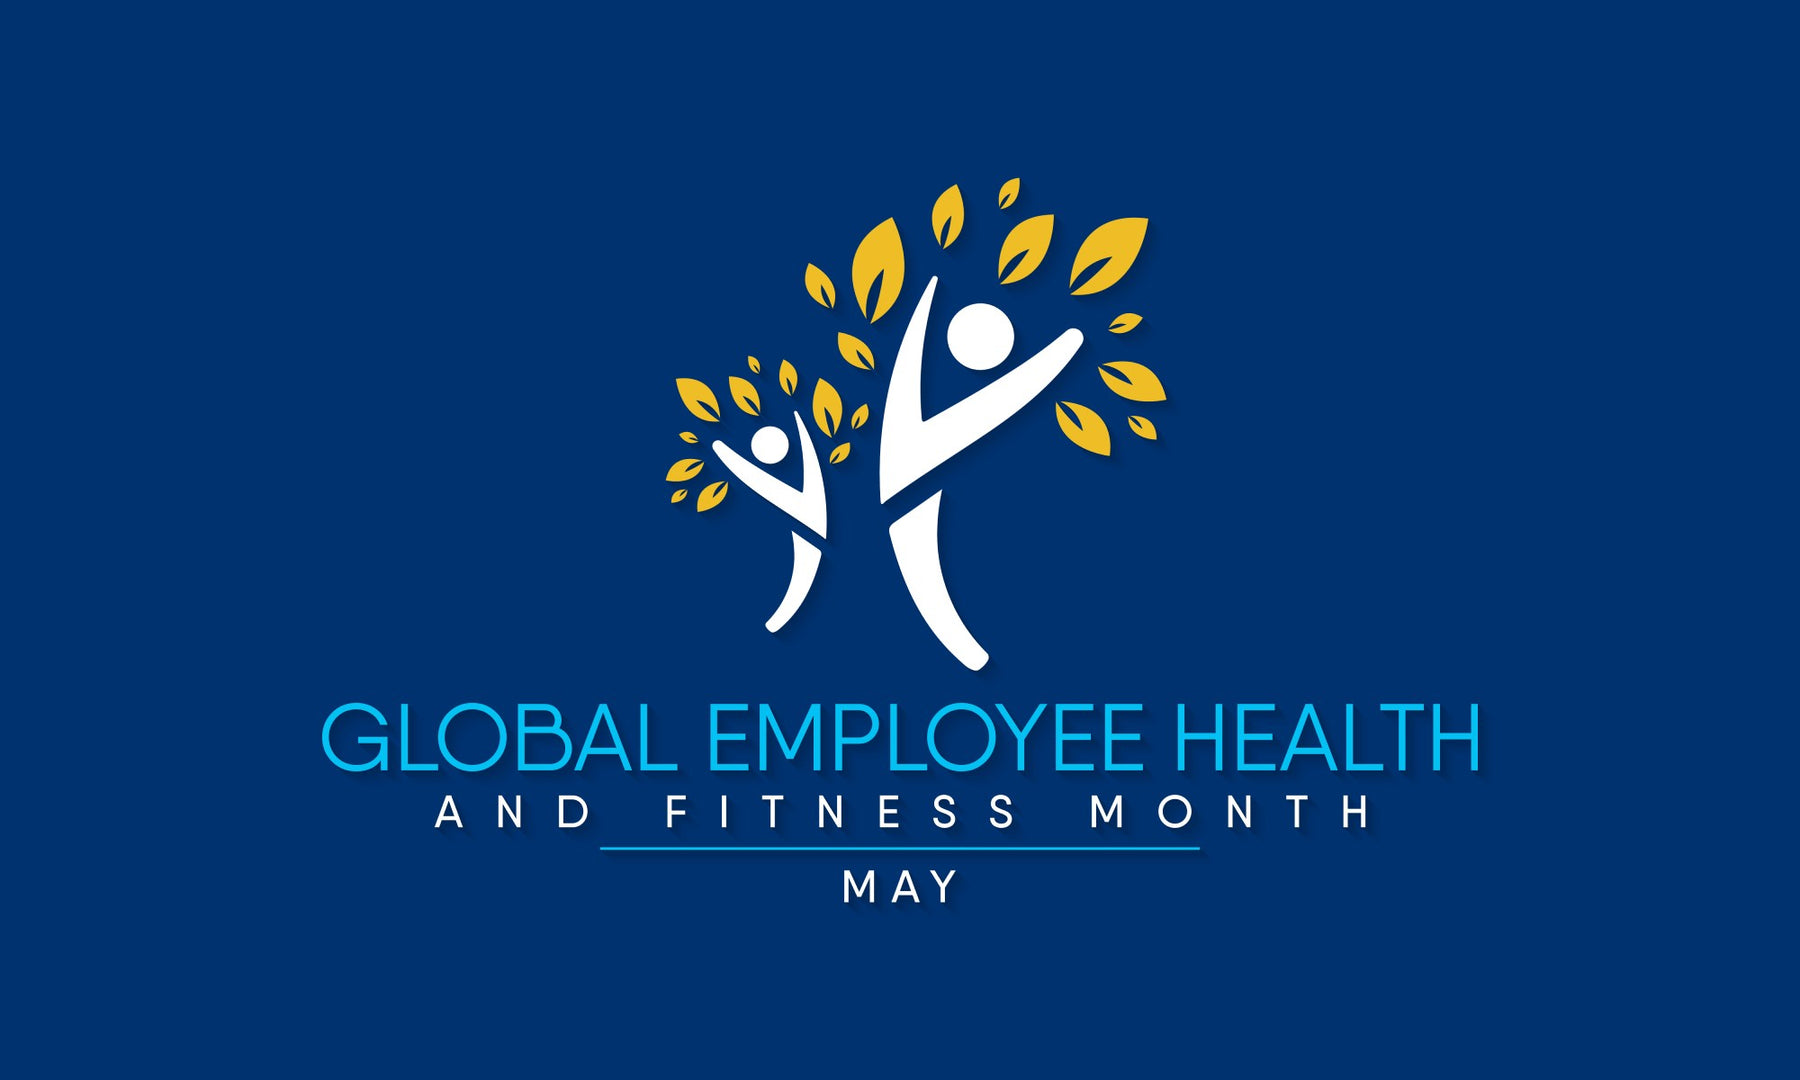 Global Employee Health and Fitness Month